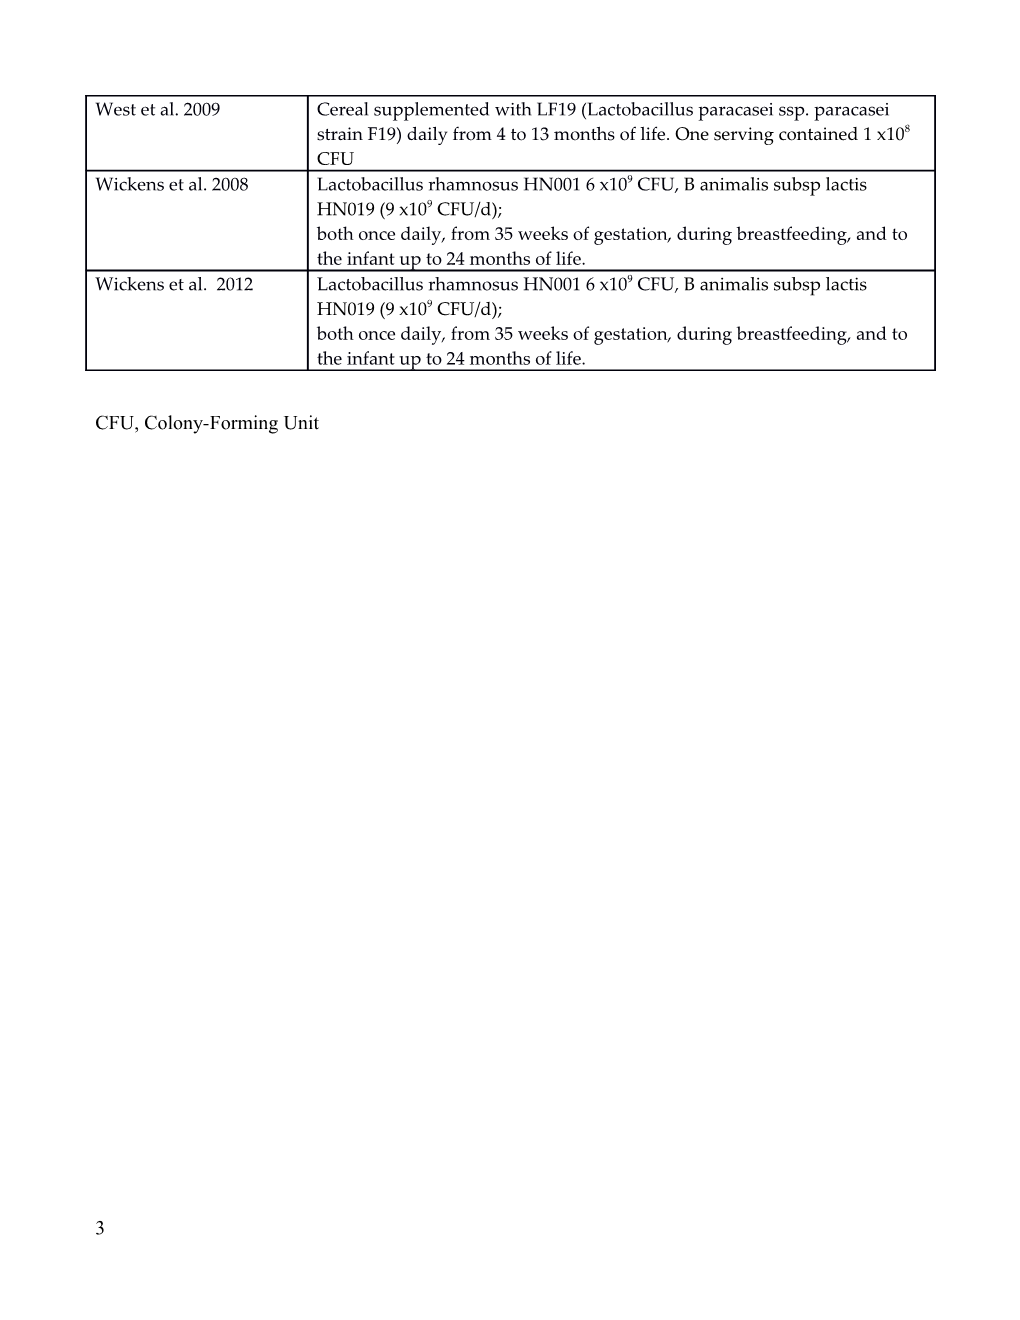 Additional File3. Probiotic Strains and Dosages Used in the Included Studies